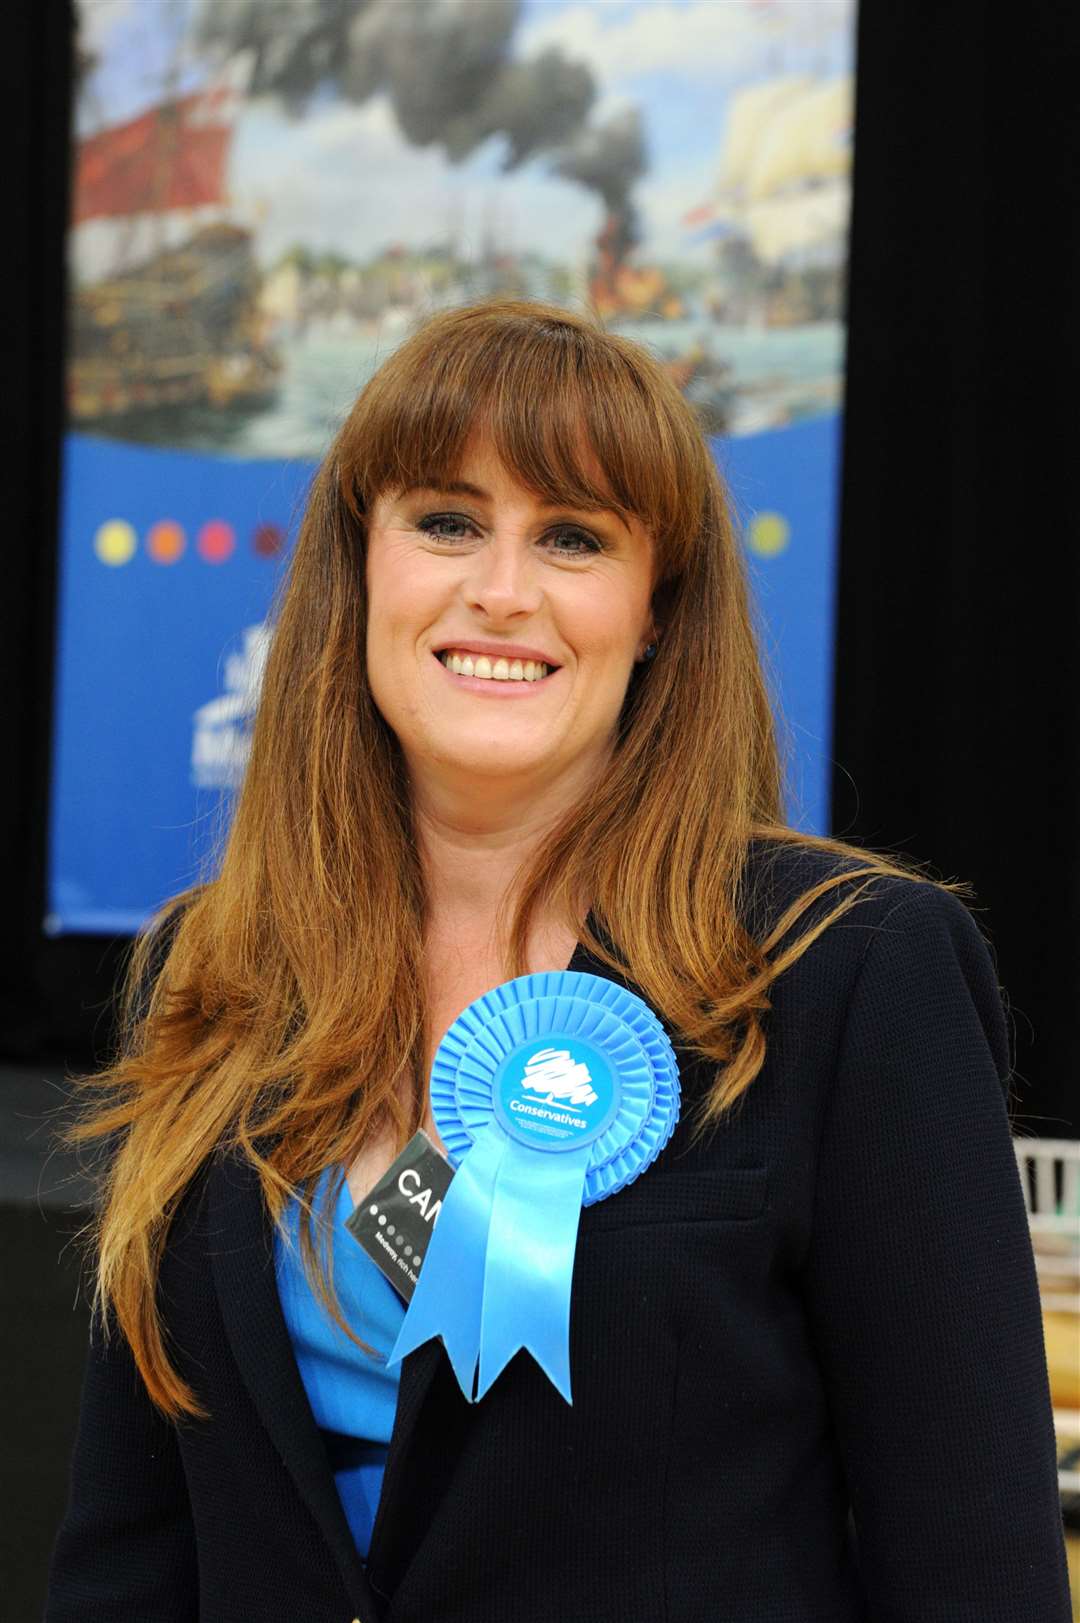 Rochester and Strood MP Kelly Tolhurst says she will be investigating and working with the authorities involved